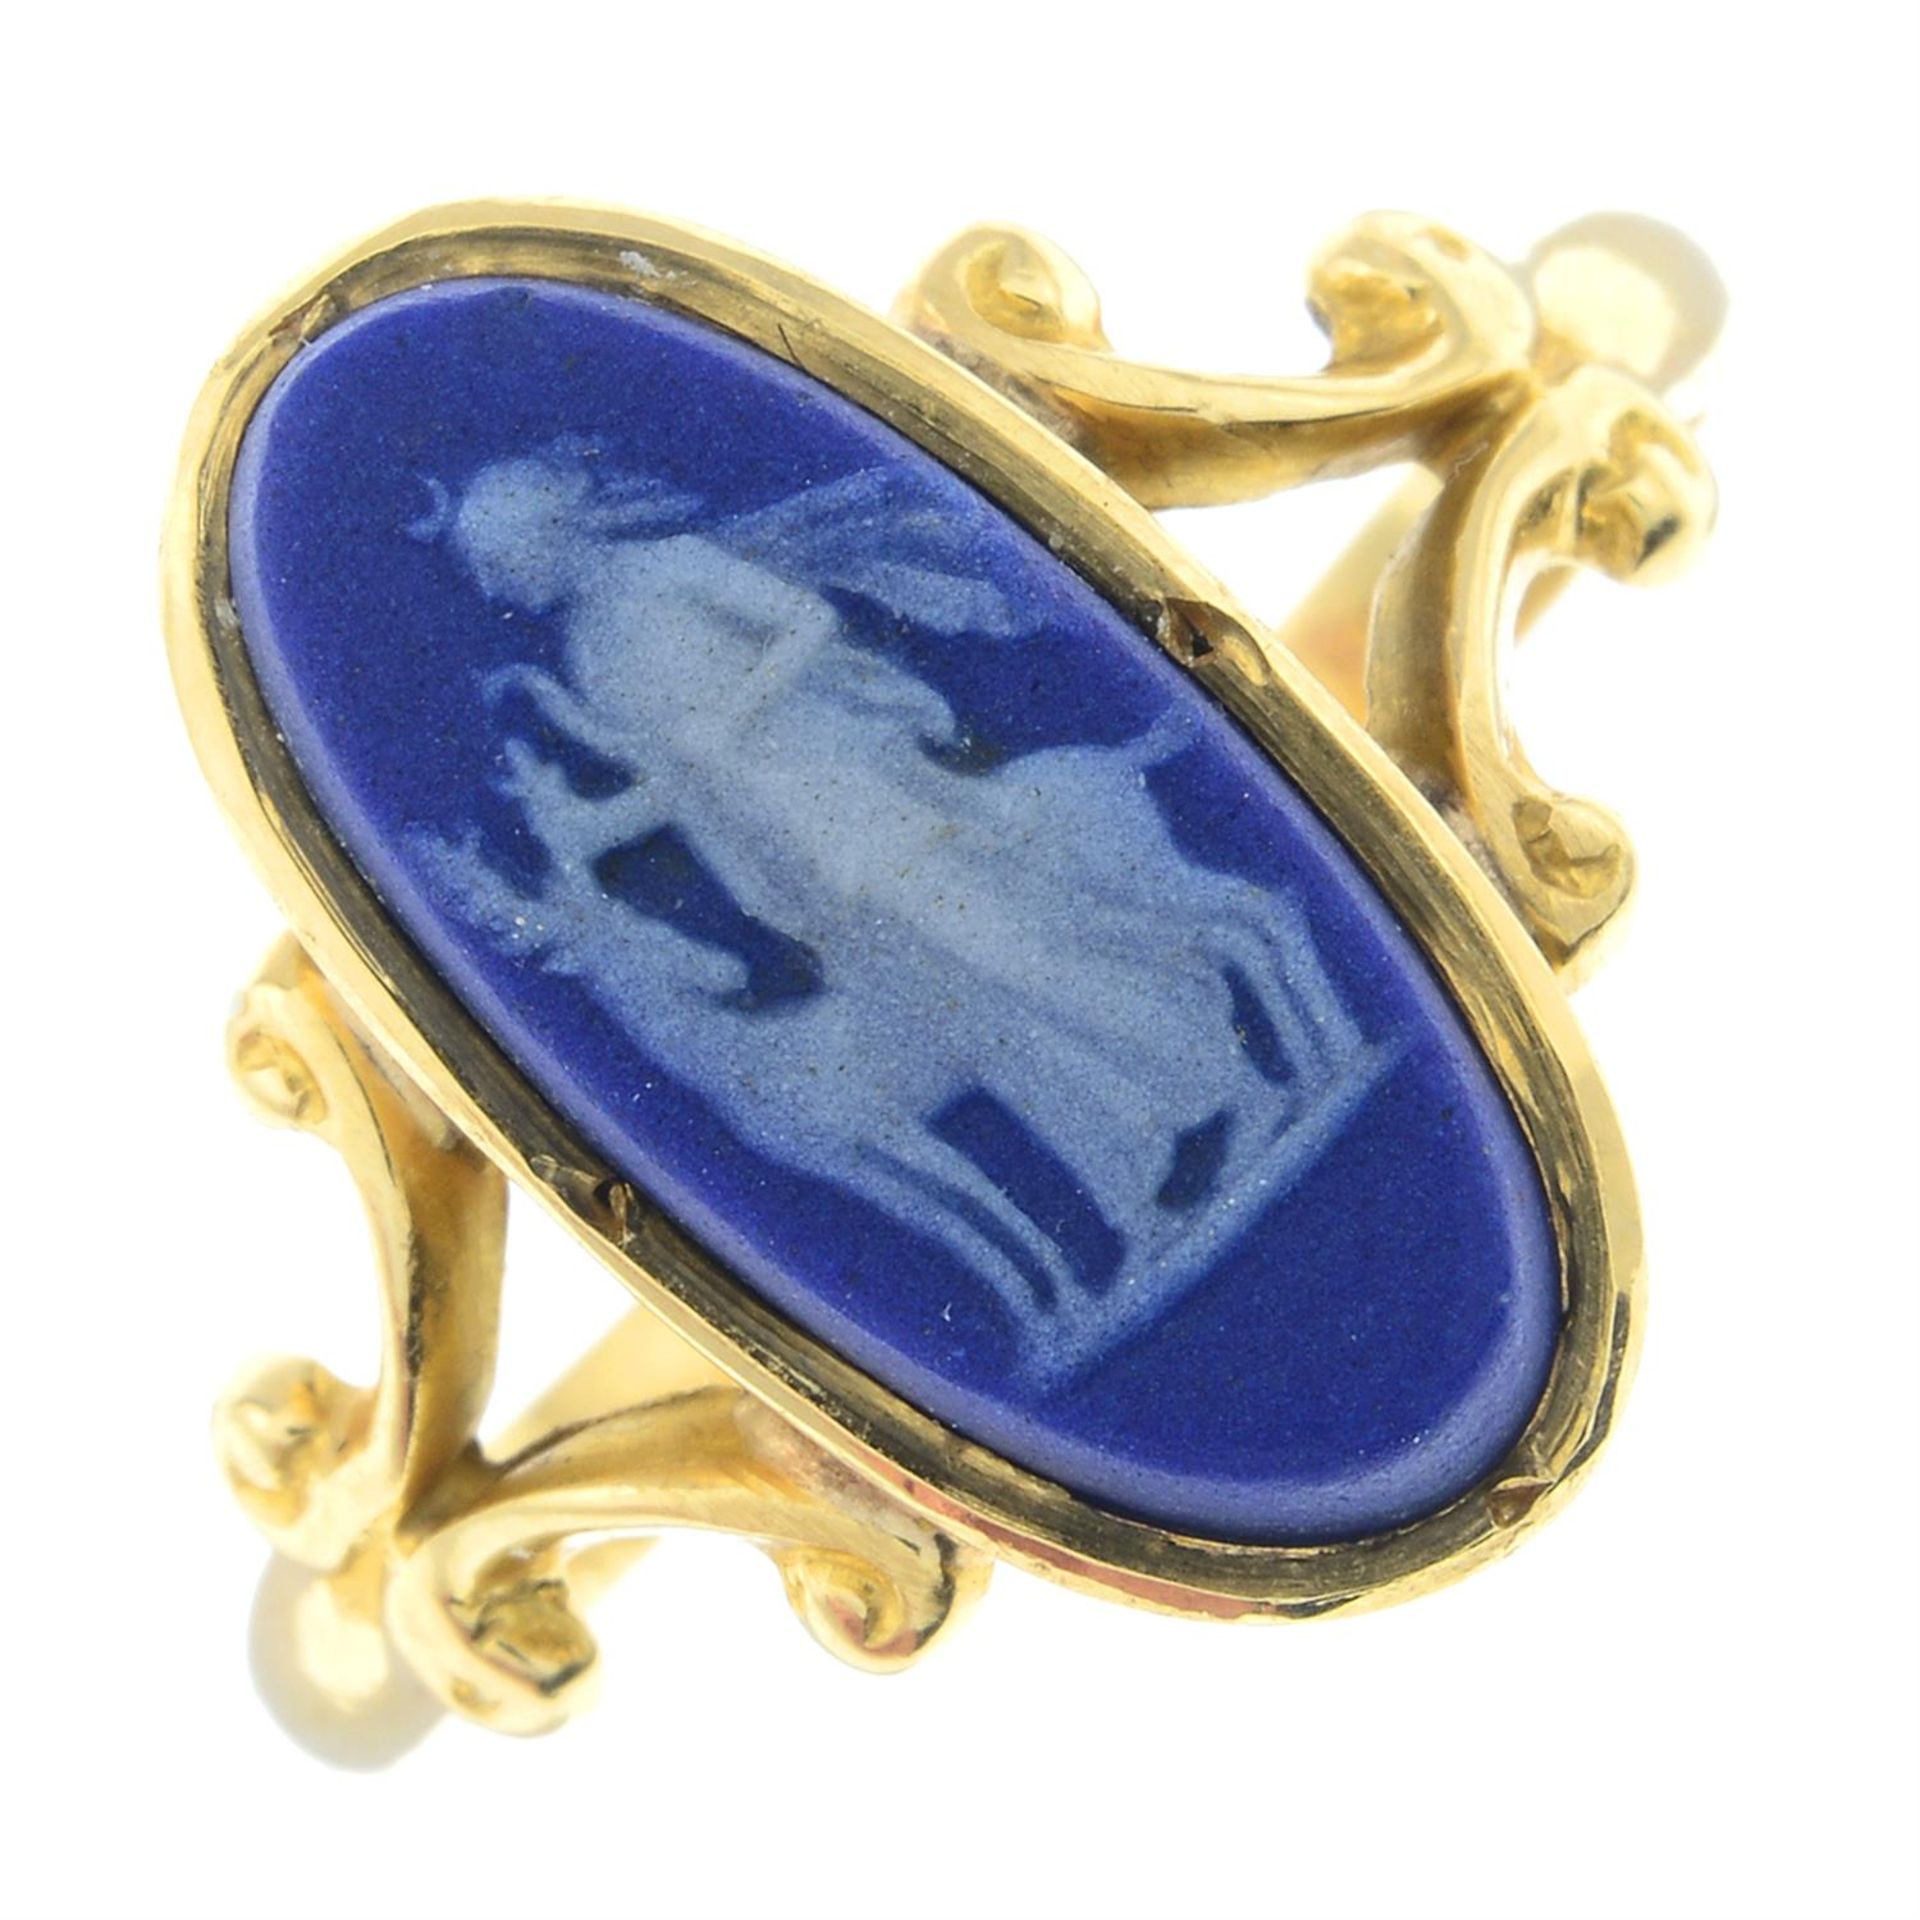 A Wedgwood jasperware ring, depicting Artemis with bow and stag.